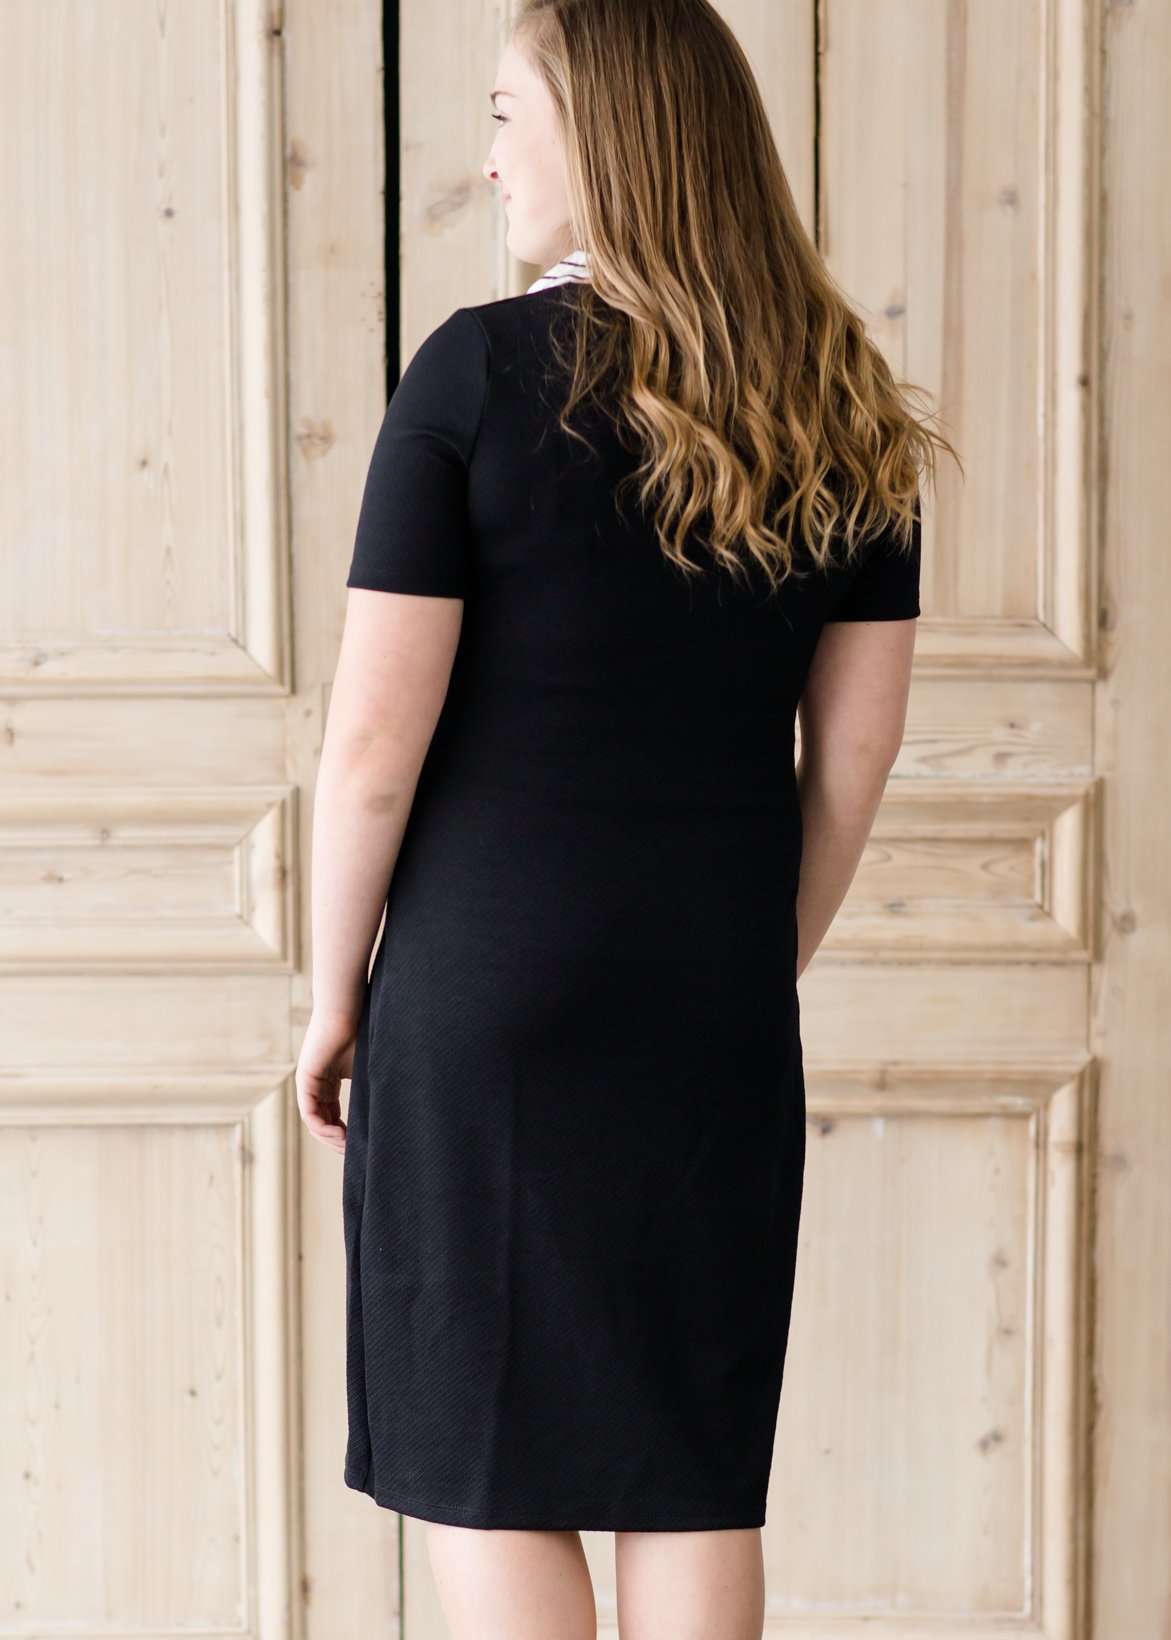 modest black midi dress with gold button accent